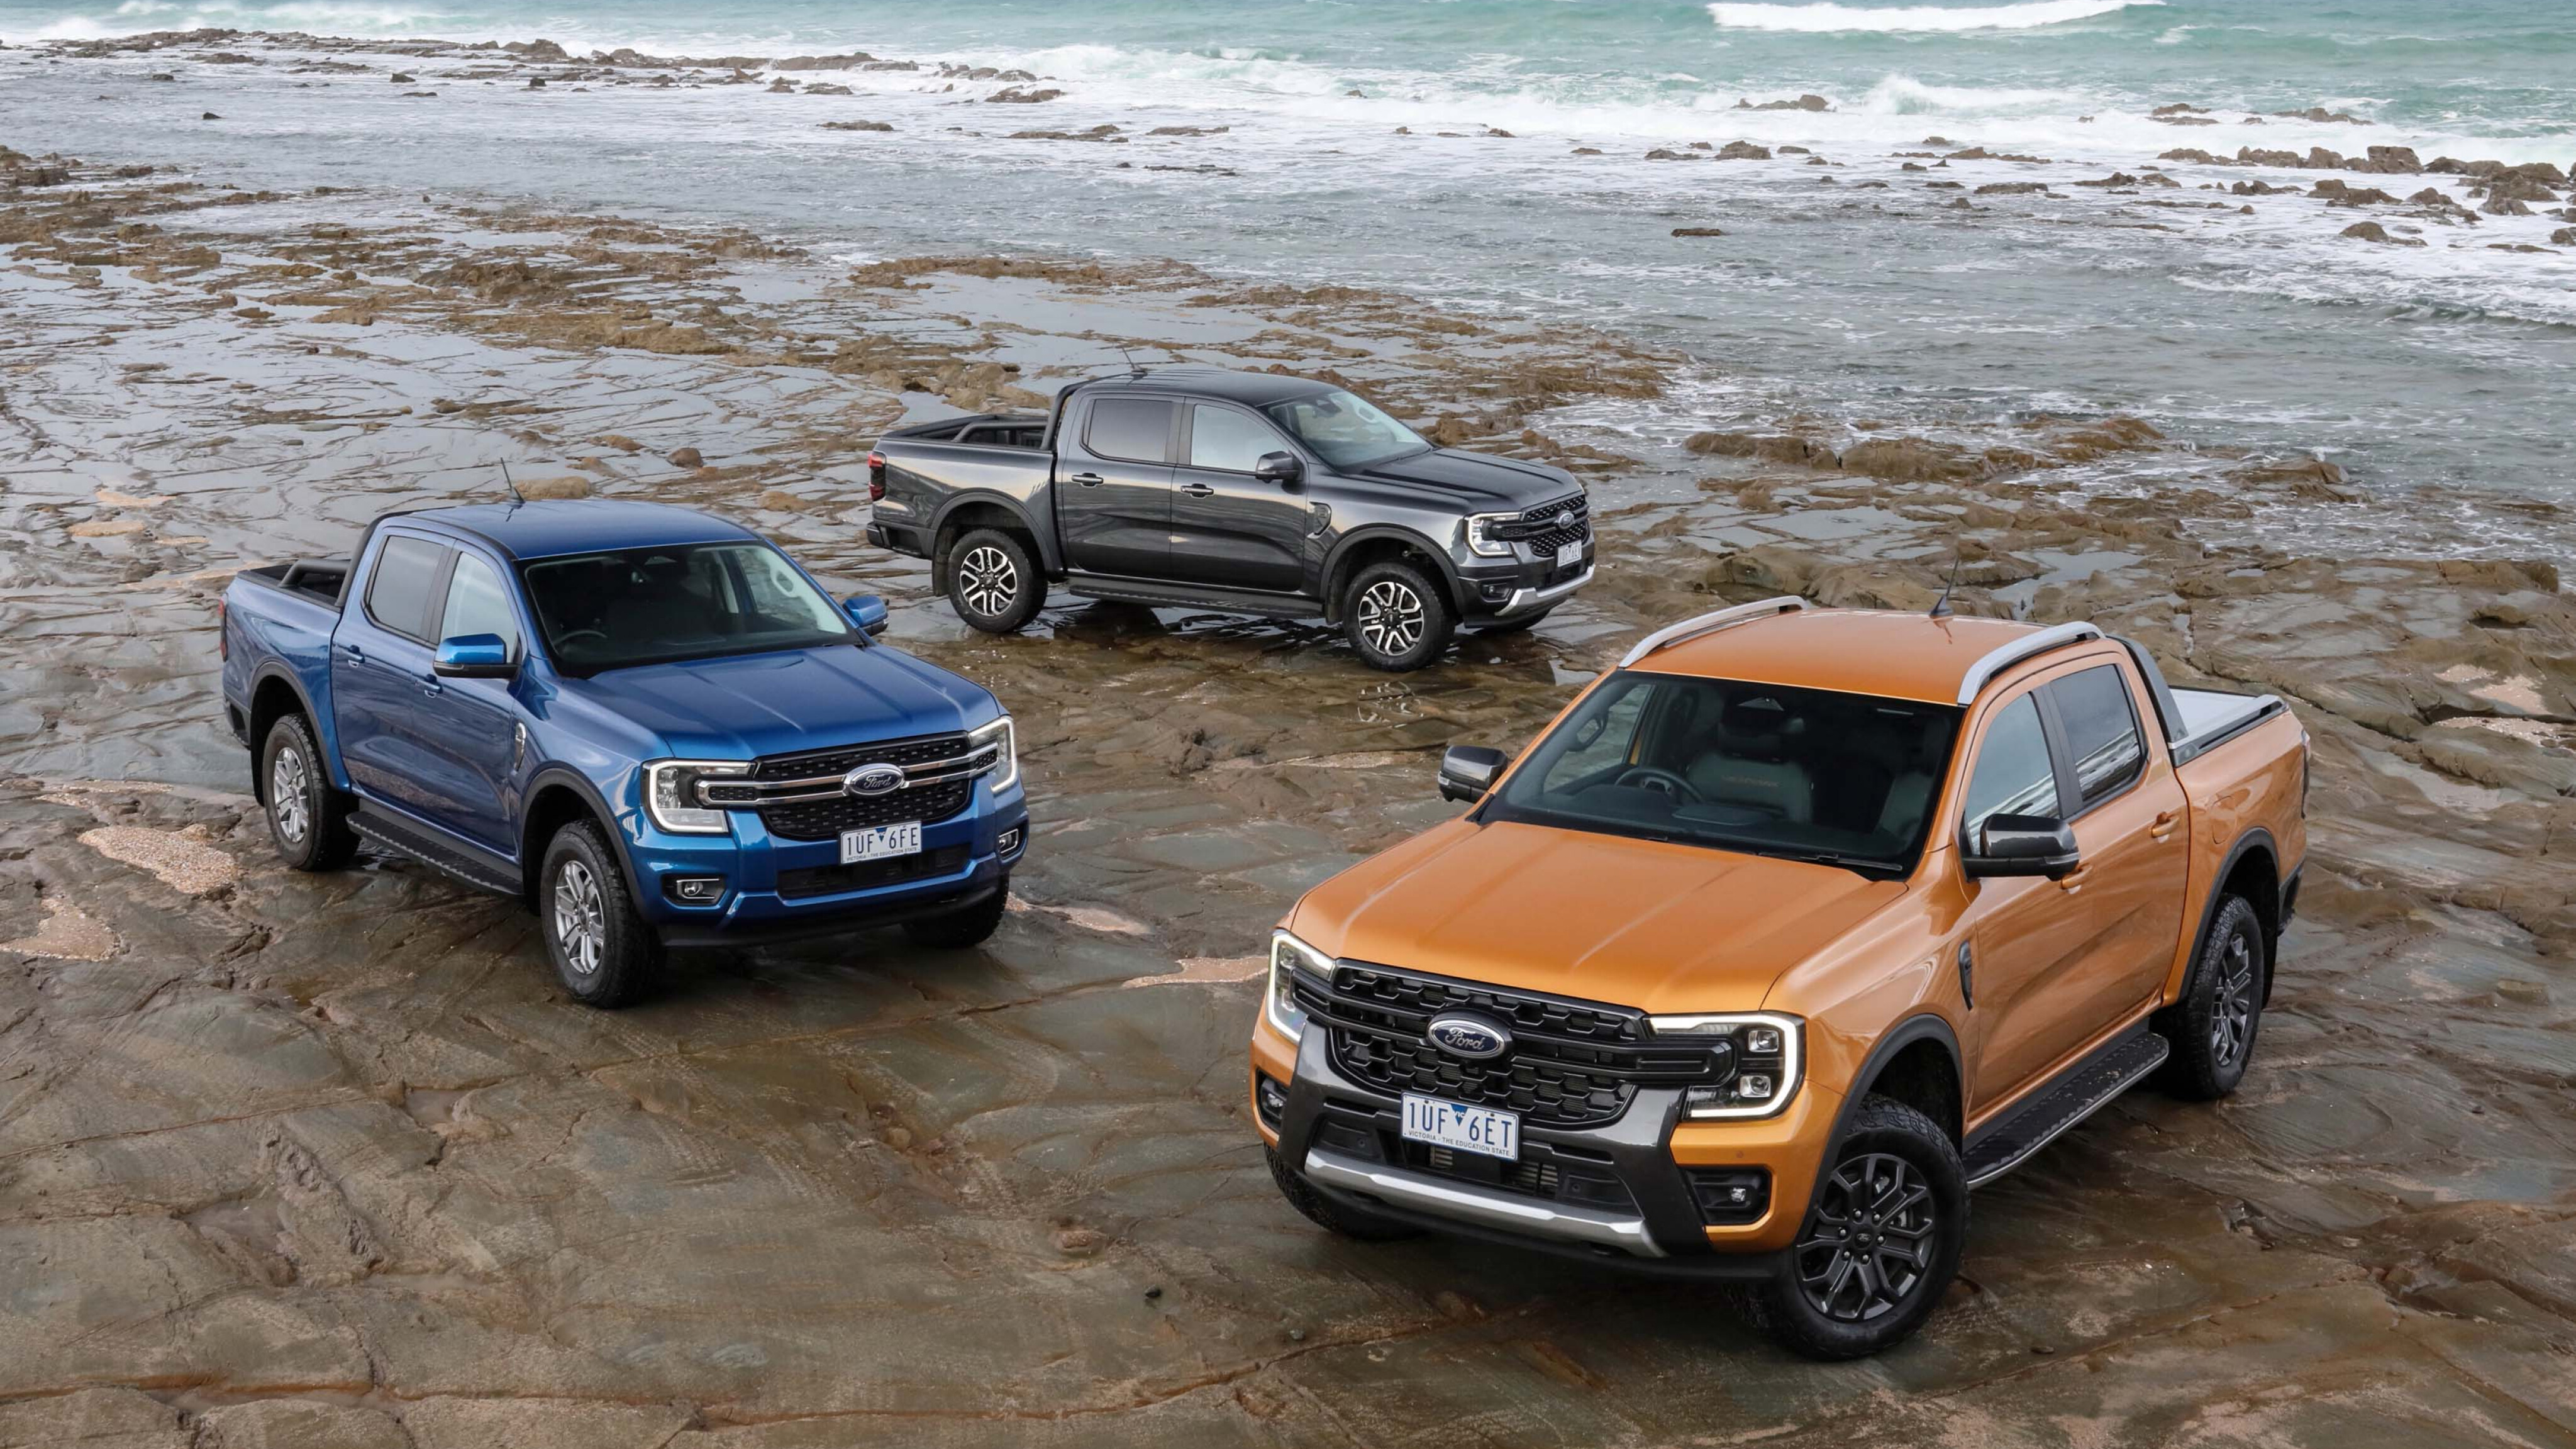 New Ford Ranger Pickup Revealed Ahead of 2023 Deliveries